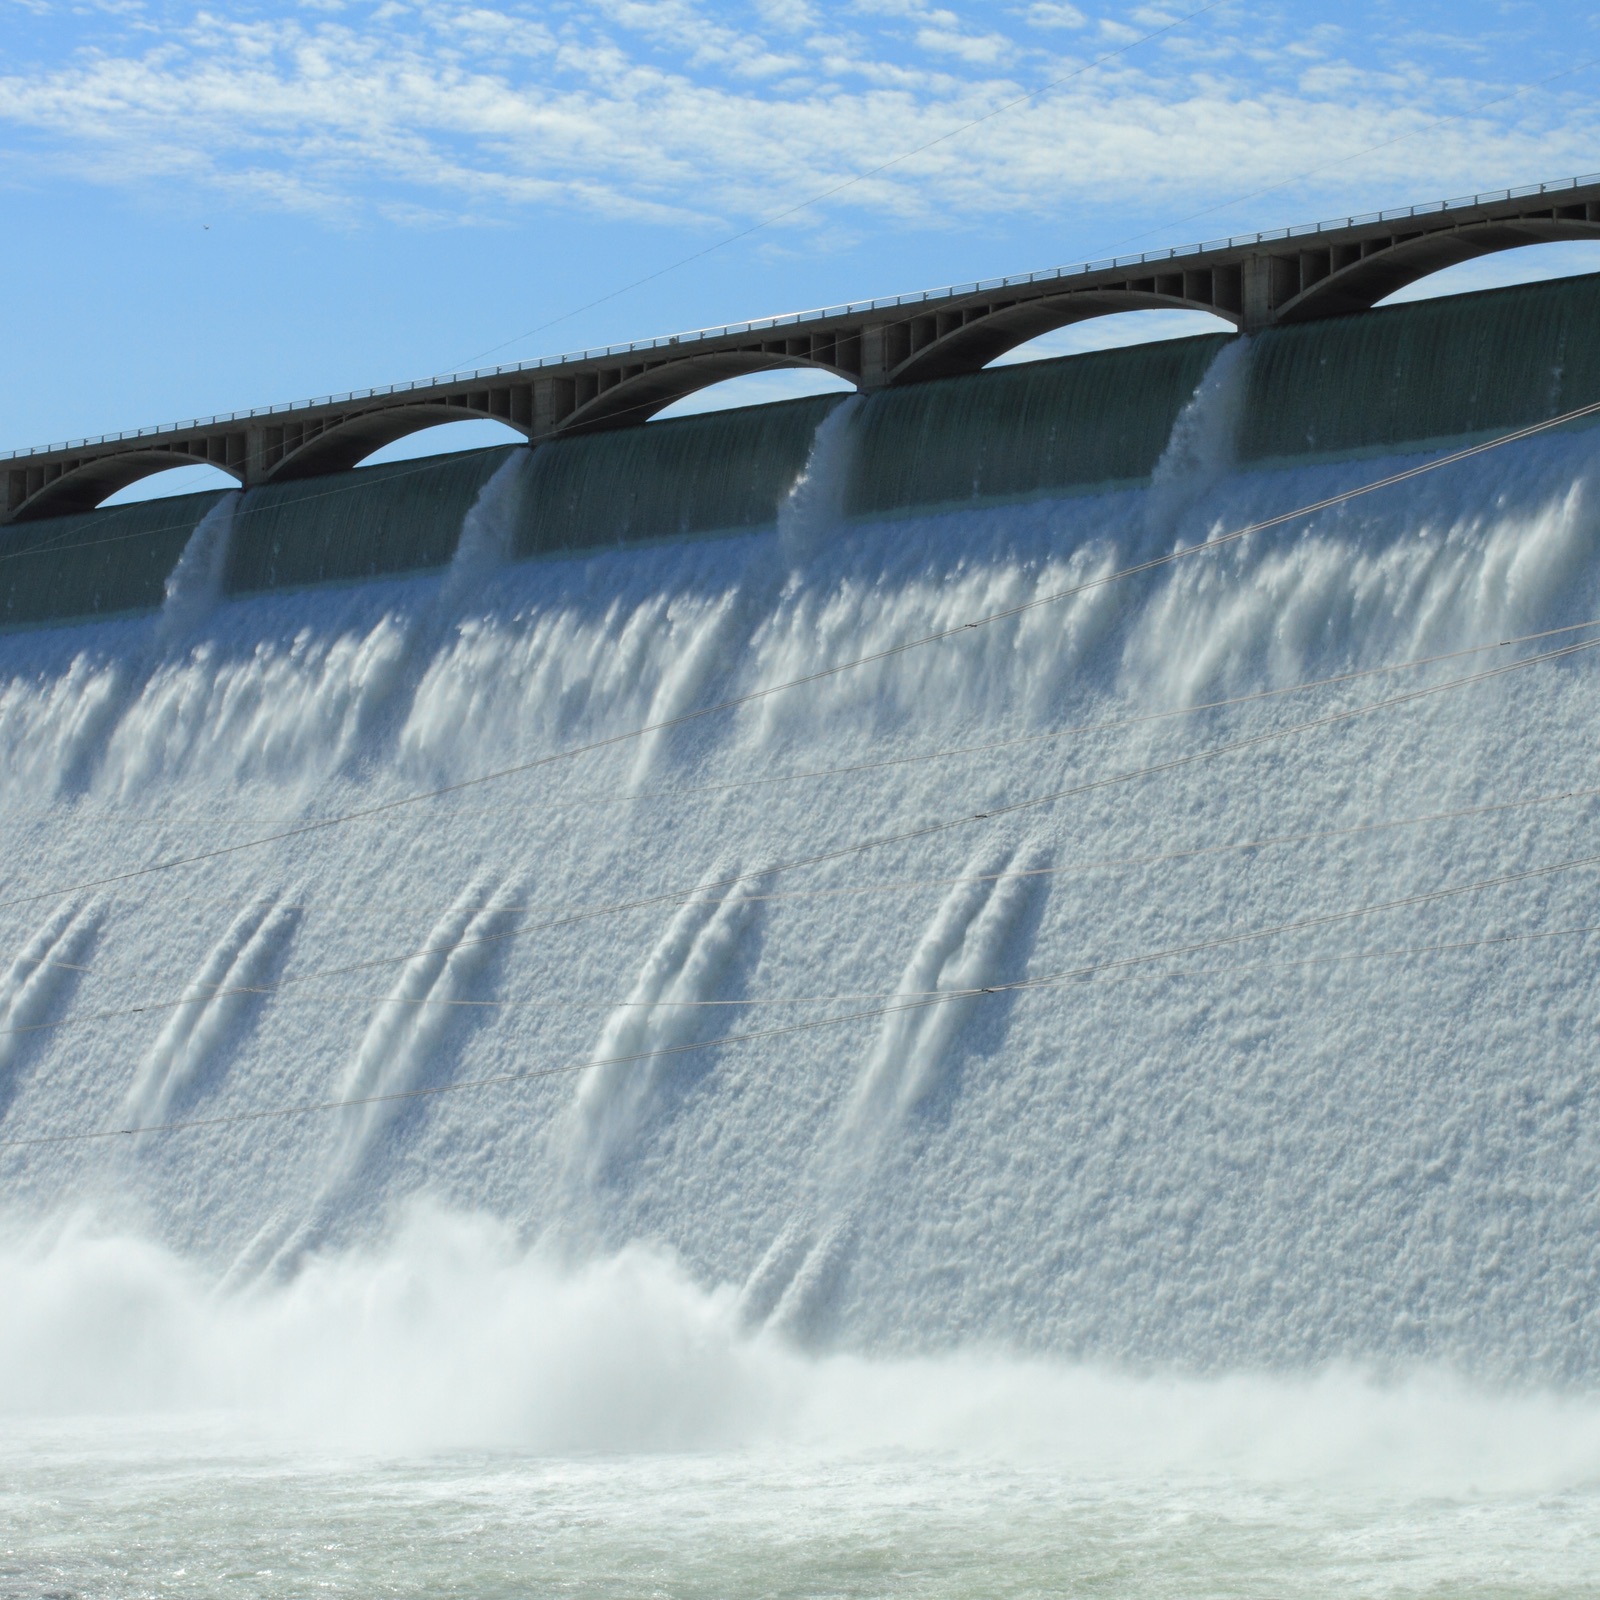 Bitcoin Miners Are Pestering Utility Companies for Cheap Hydro Power